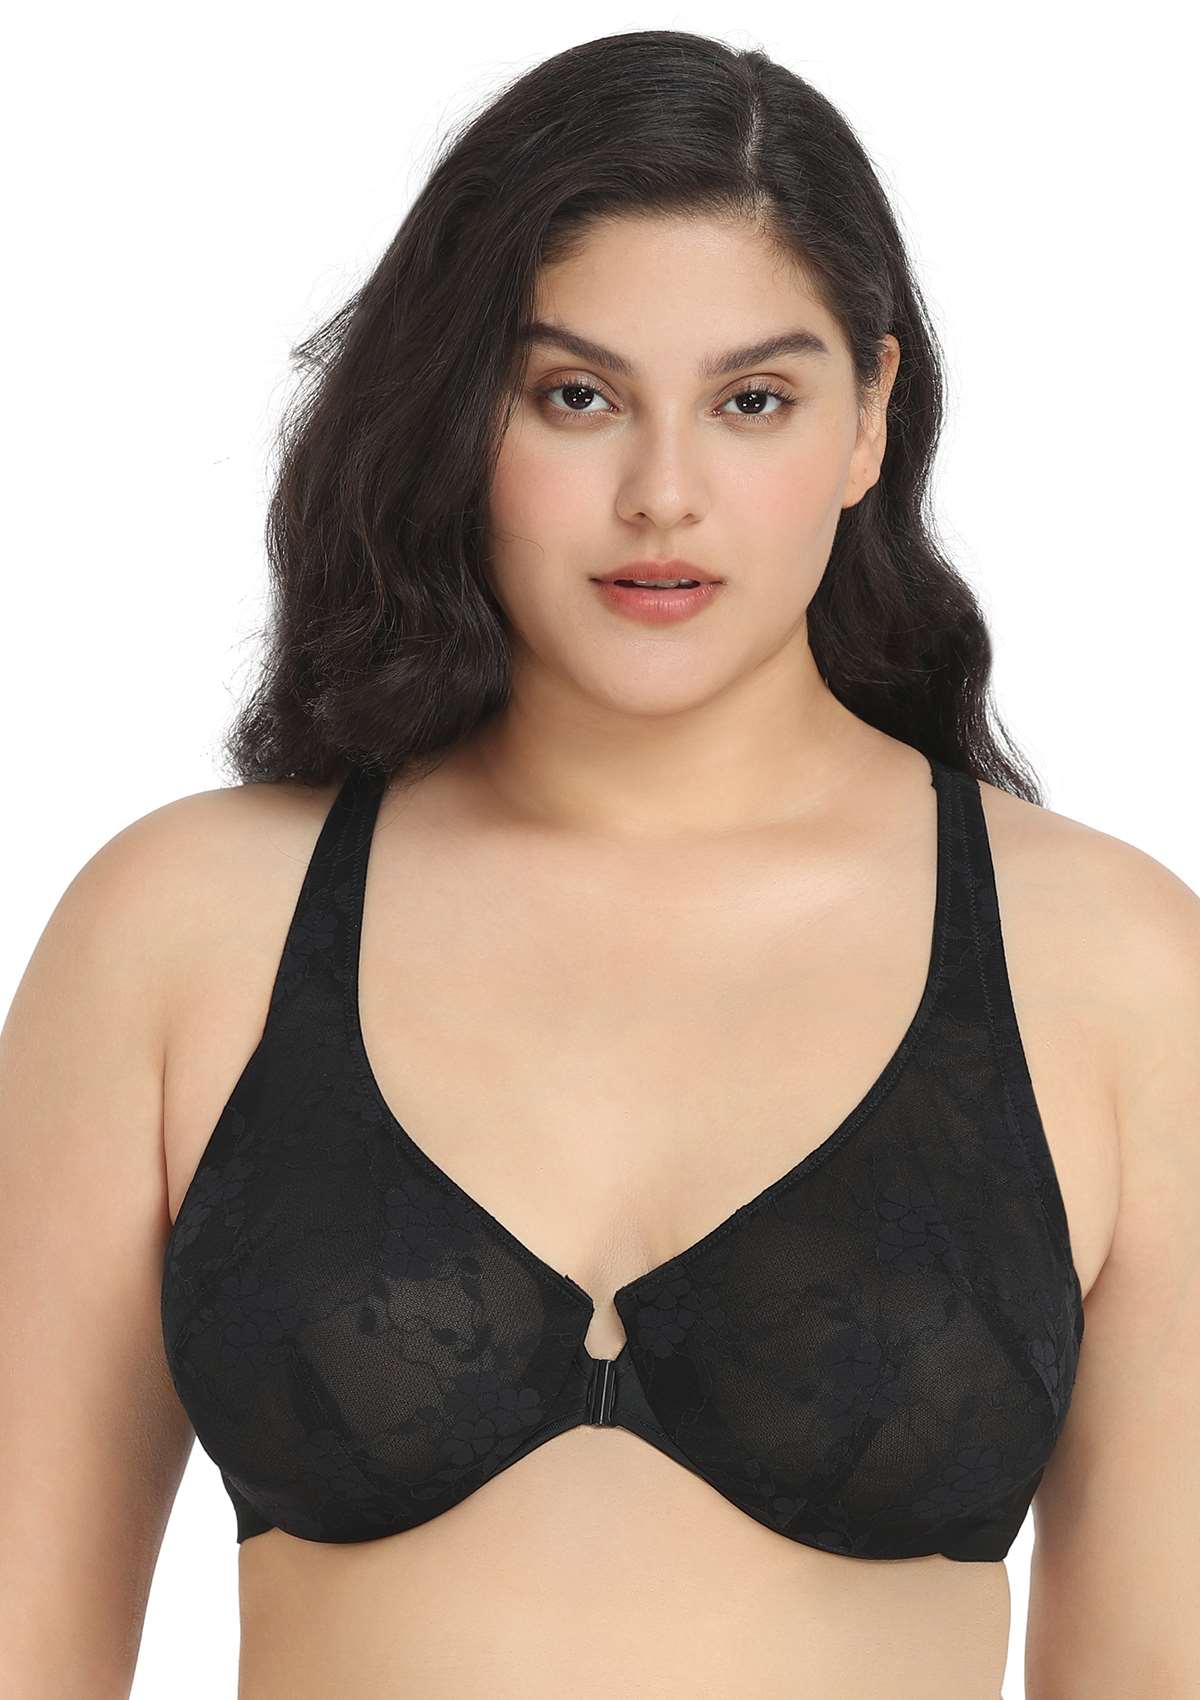 HSIA Spring Romance Front-Close Floral Lace Unlined Full Coverage Bra - Black / 34 / D